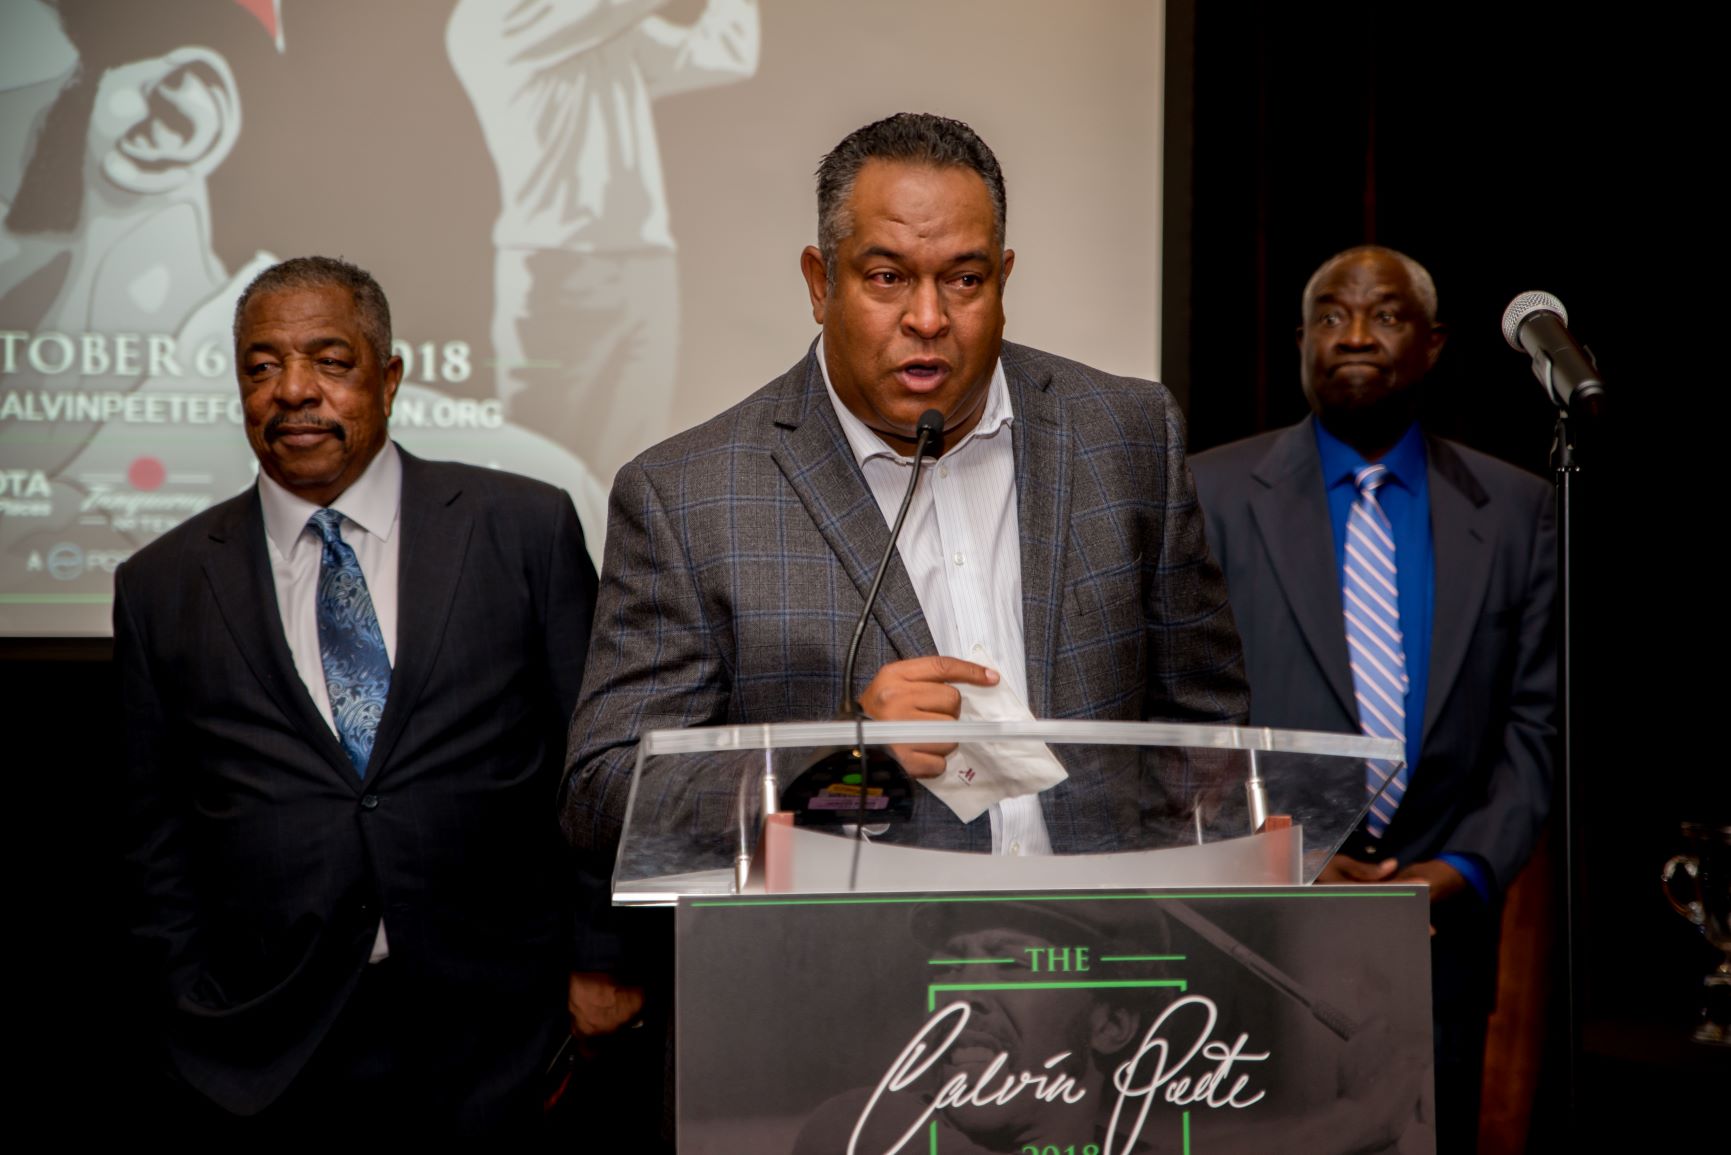 Father of Cameron Champ, Jeff Champ, speaks at The 2018 Calvin Peete Awards at The Marriott Buckhead Atlanta on October 6th